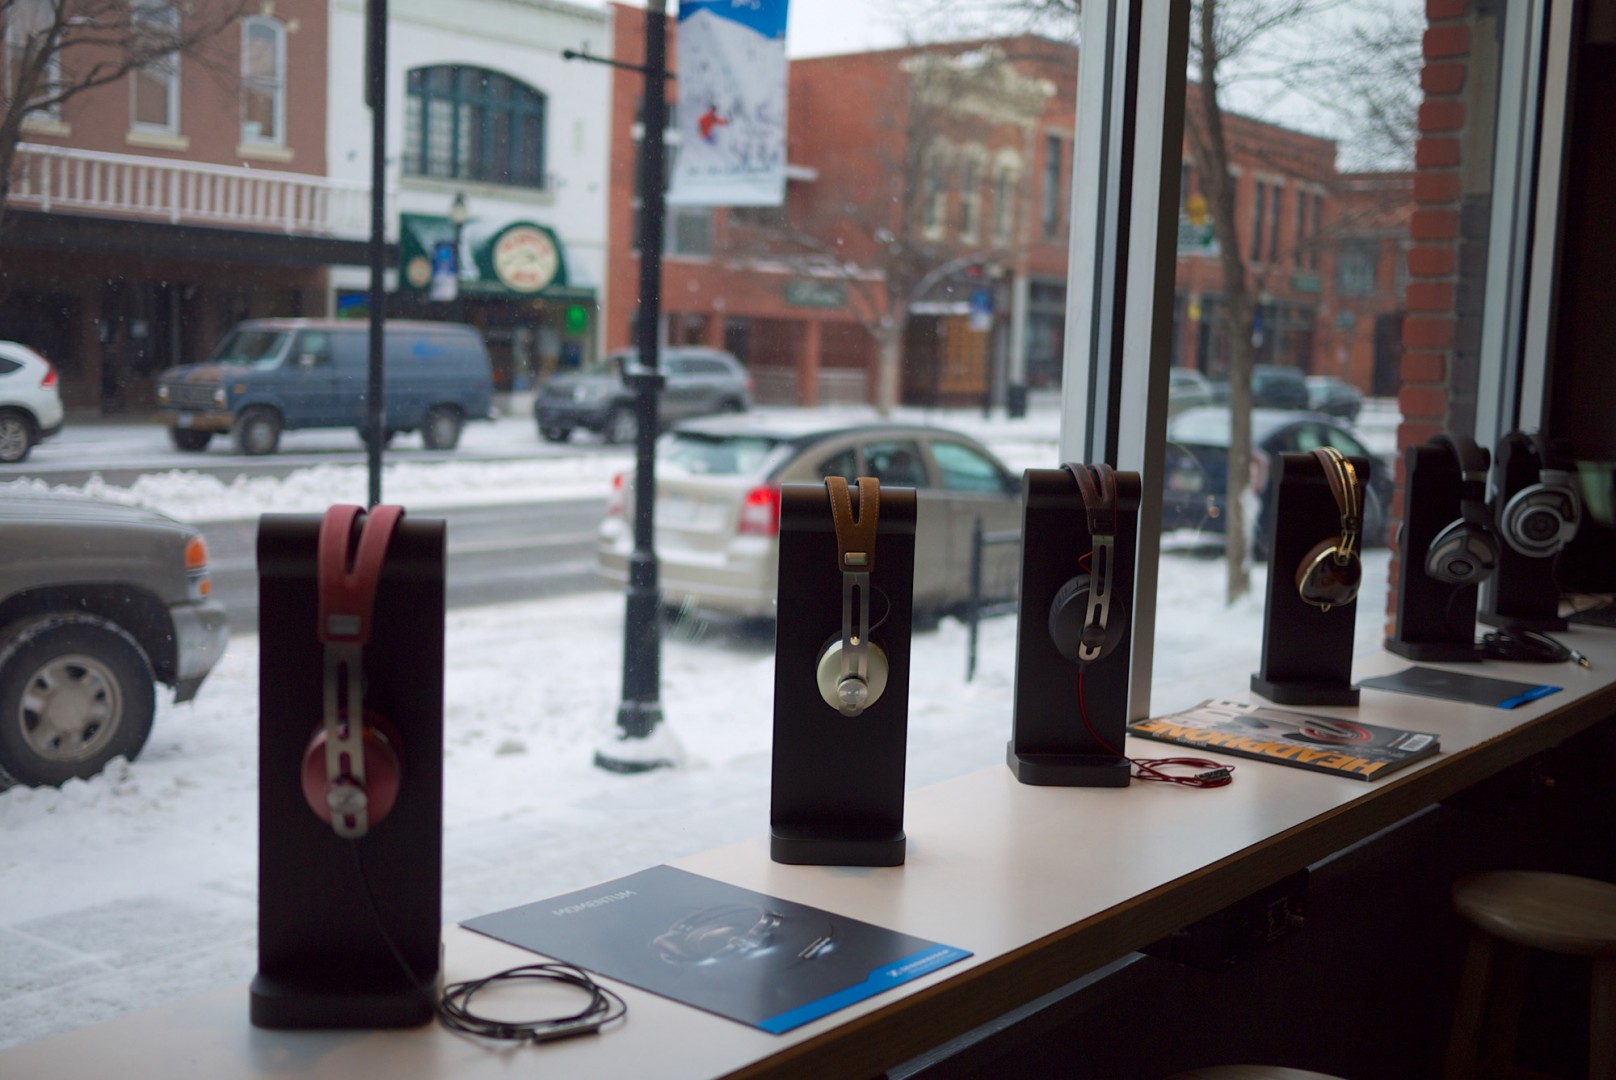 Some of our favorite headphones catch many an eye, and ear, of downtown Bozeman shoppers.